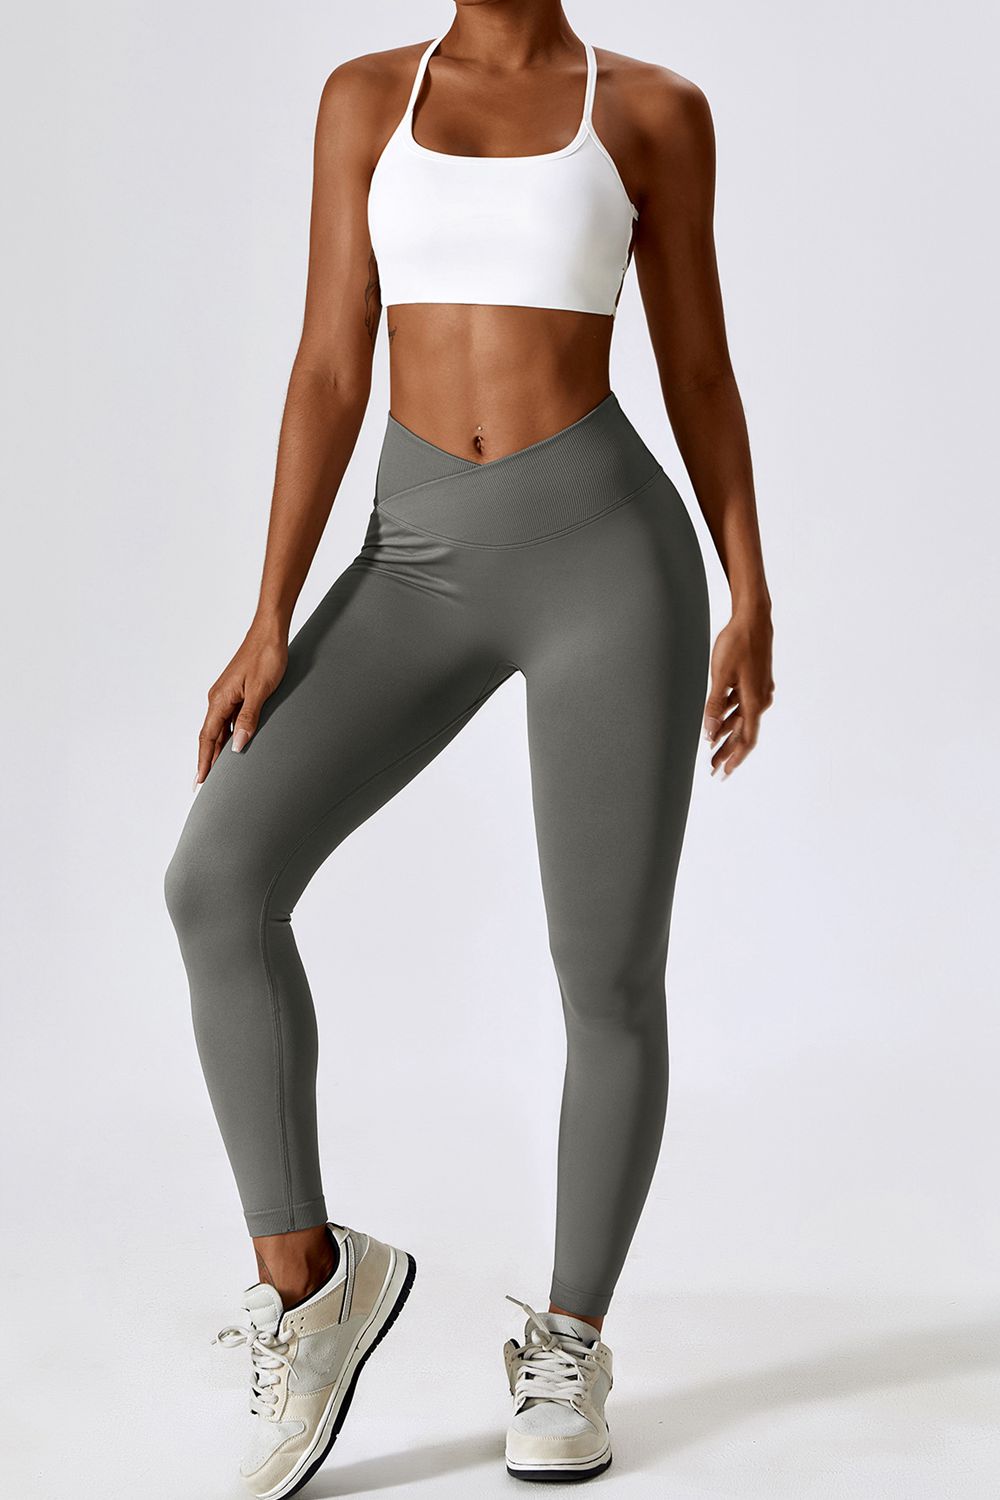 Slim Fit Wide Waistband Sports Leggings Other Colors Available